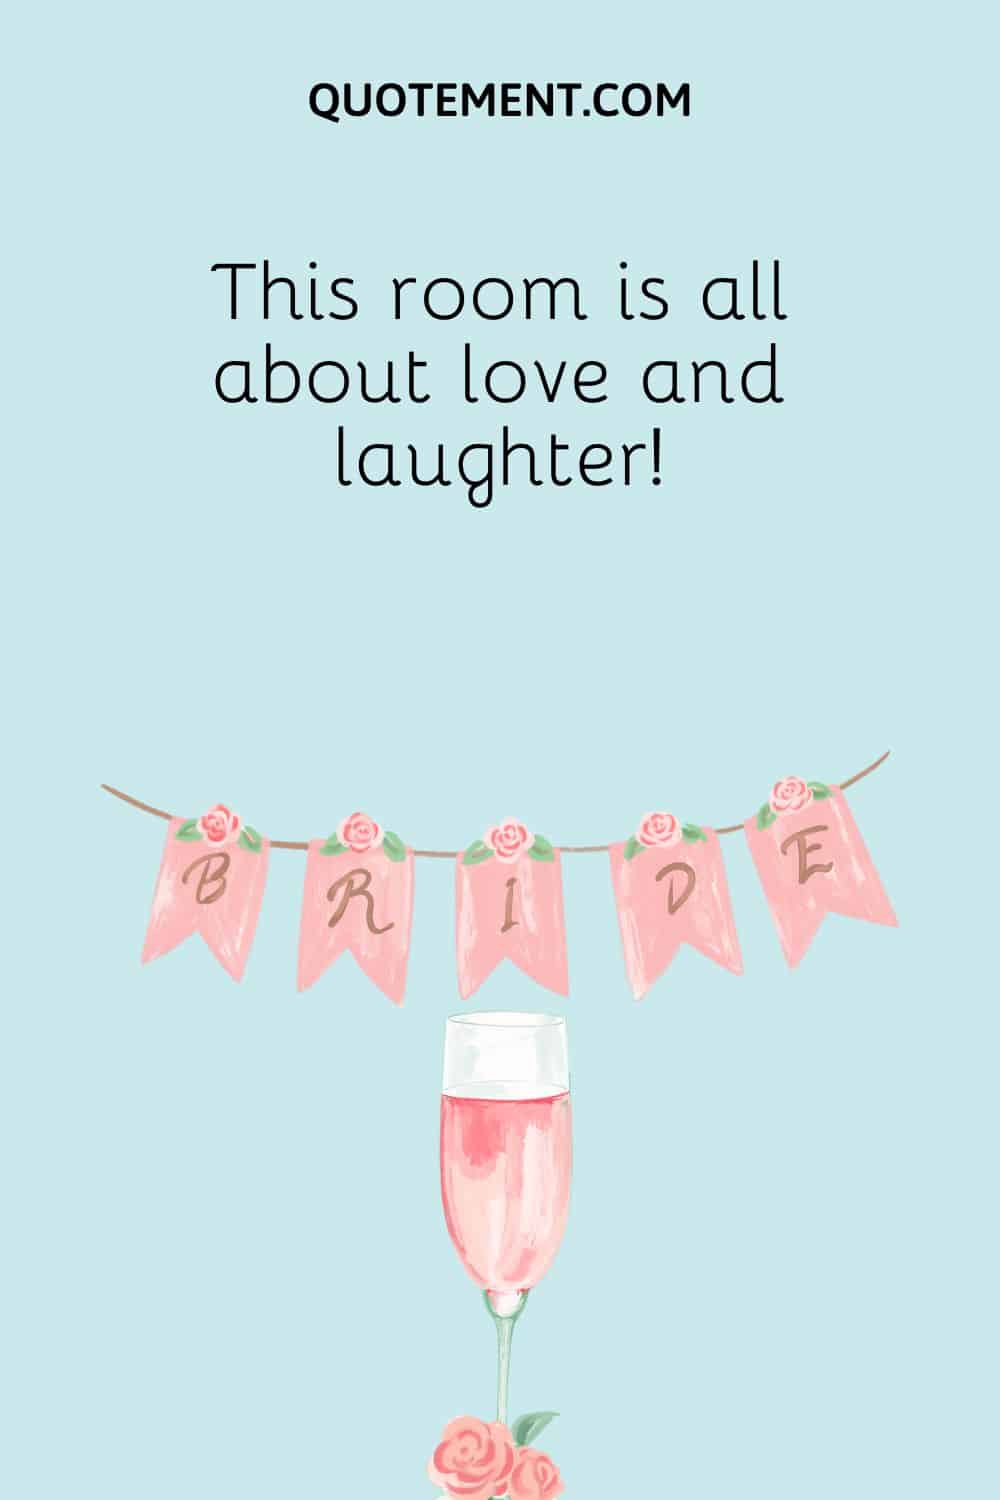 This room is all about love and laughter!